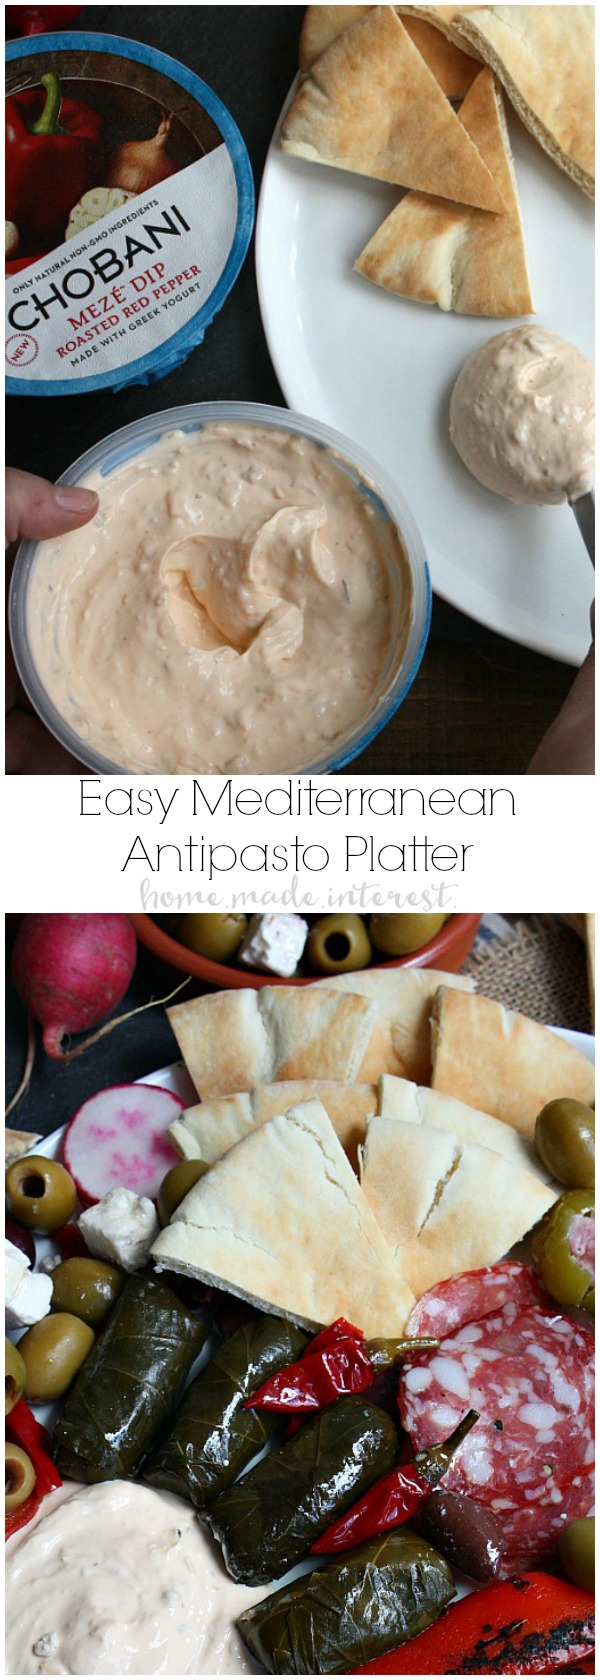 This easy antipasto platter is going to be a hit at your next party. A mediterranean antipasto platter filled with peppers, dolmas, meats, olives, and cheeses, served with flavored greek yogurts and pita bread, makes the perfect appetizer for a party. 